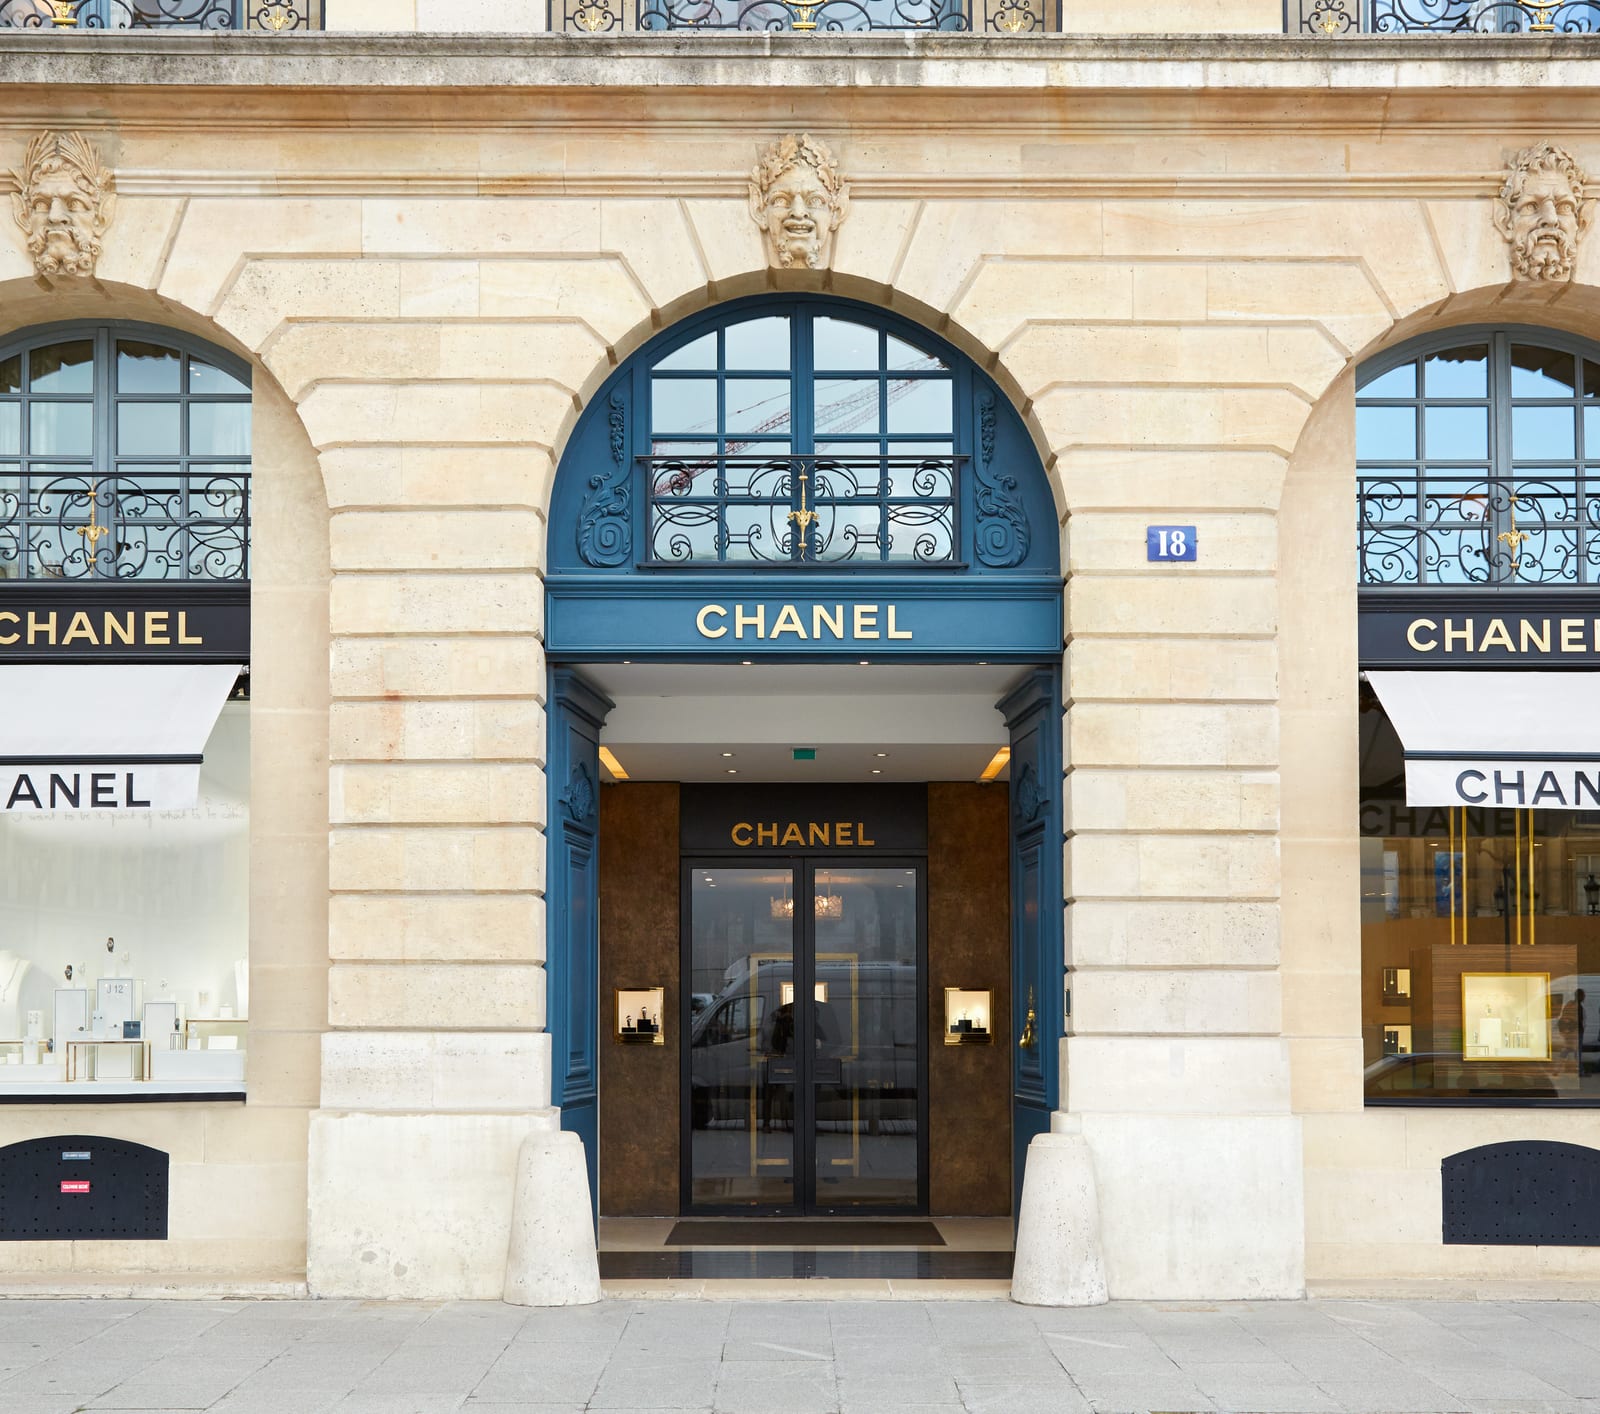 Where is the Cheapest Place to Buy Chanel? ValueChampion Singapore